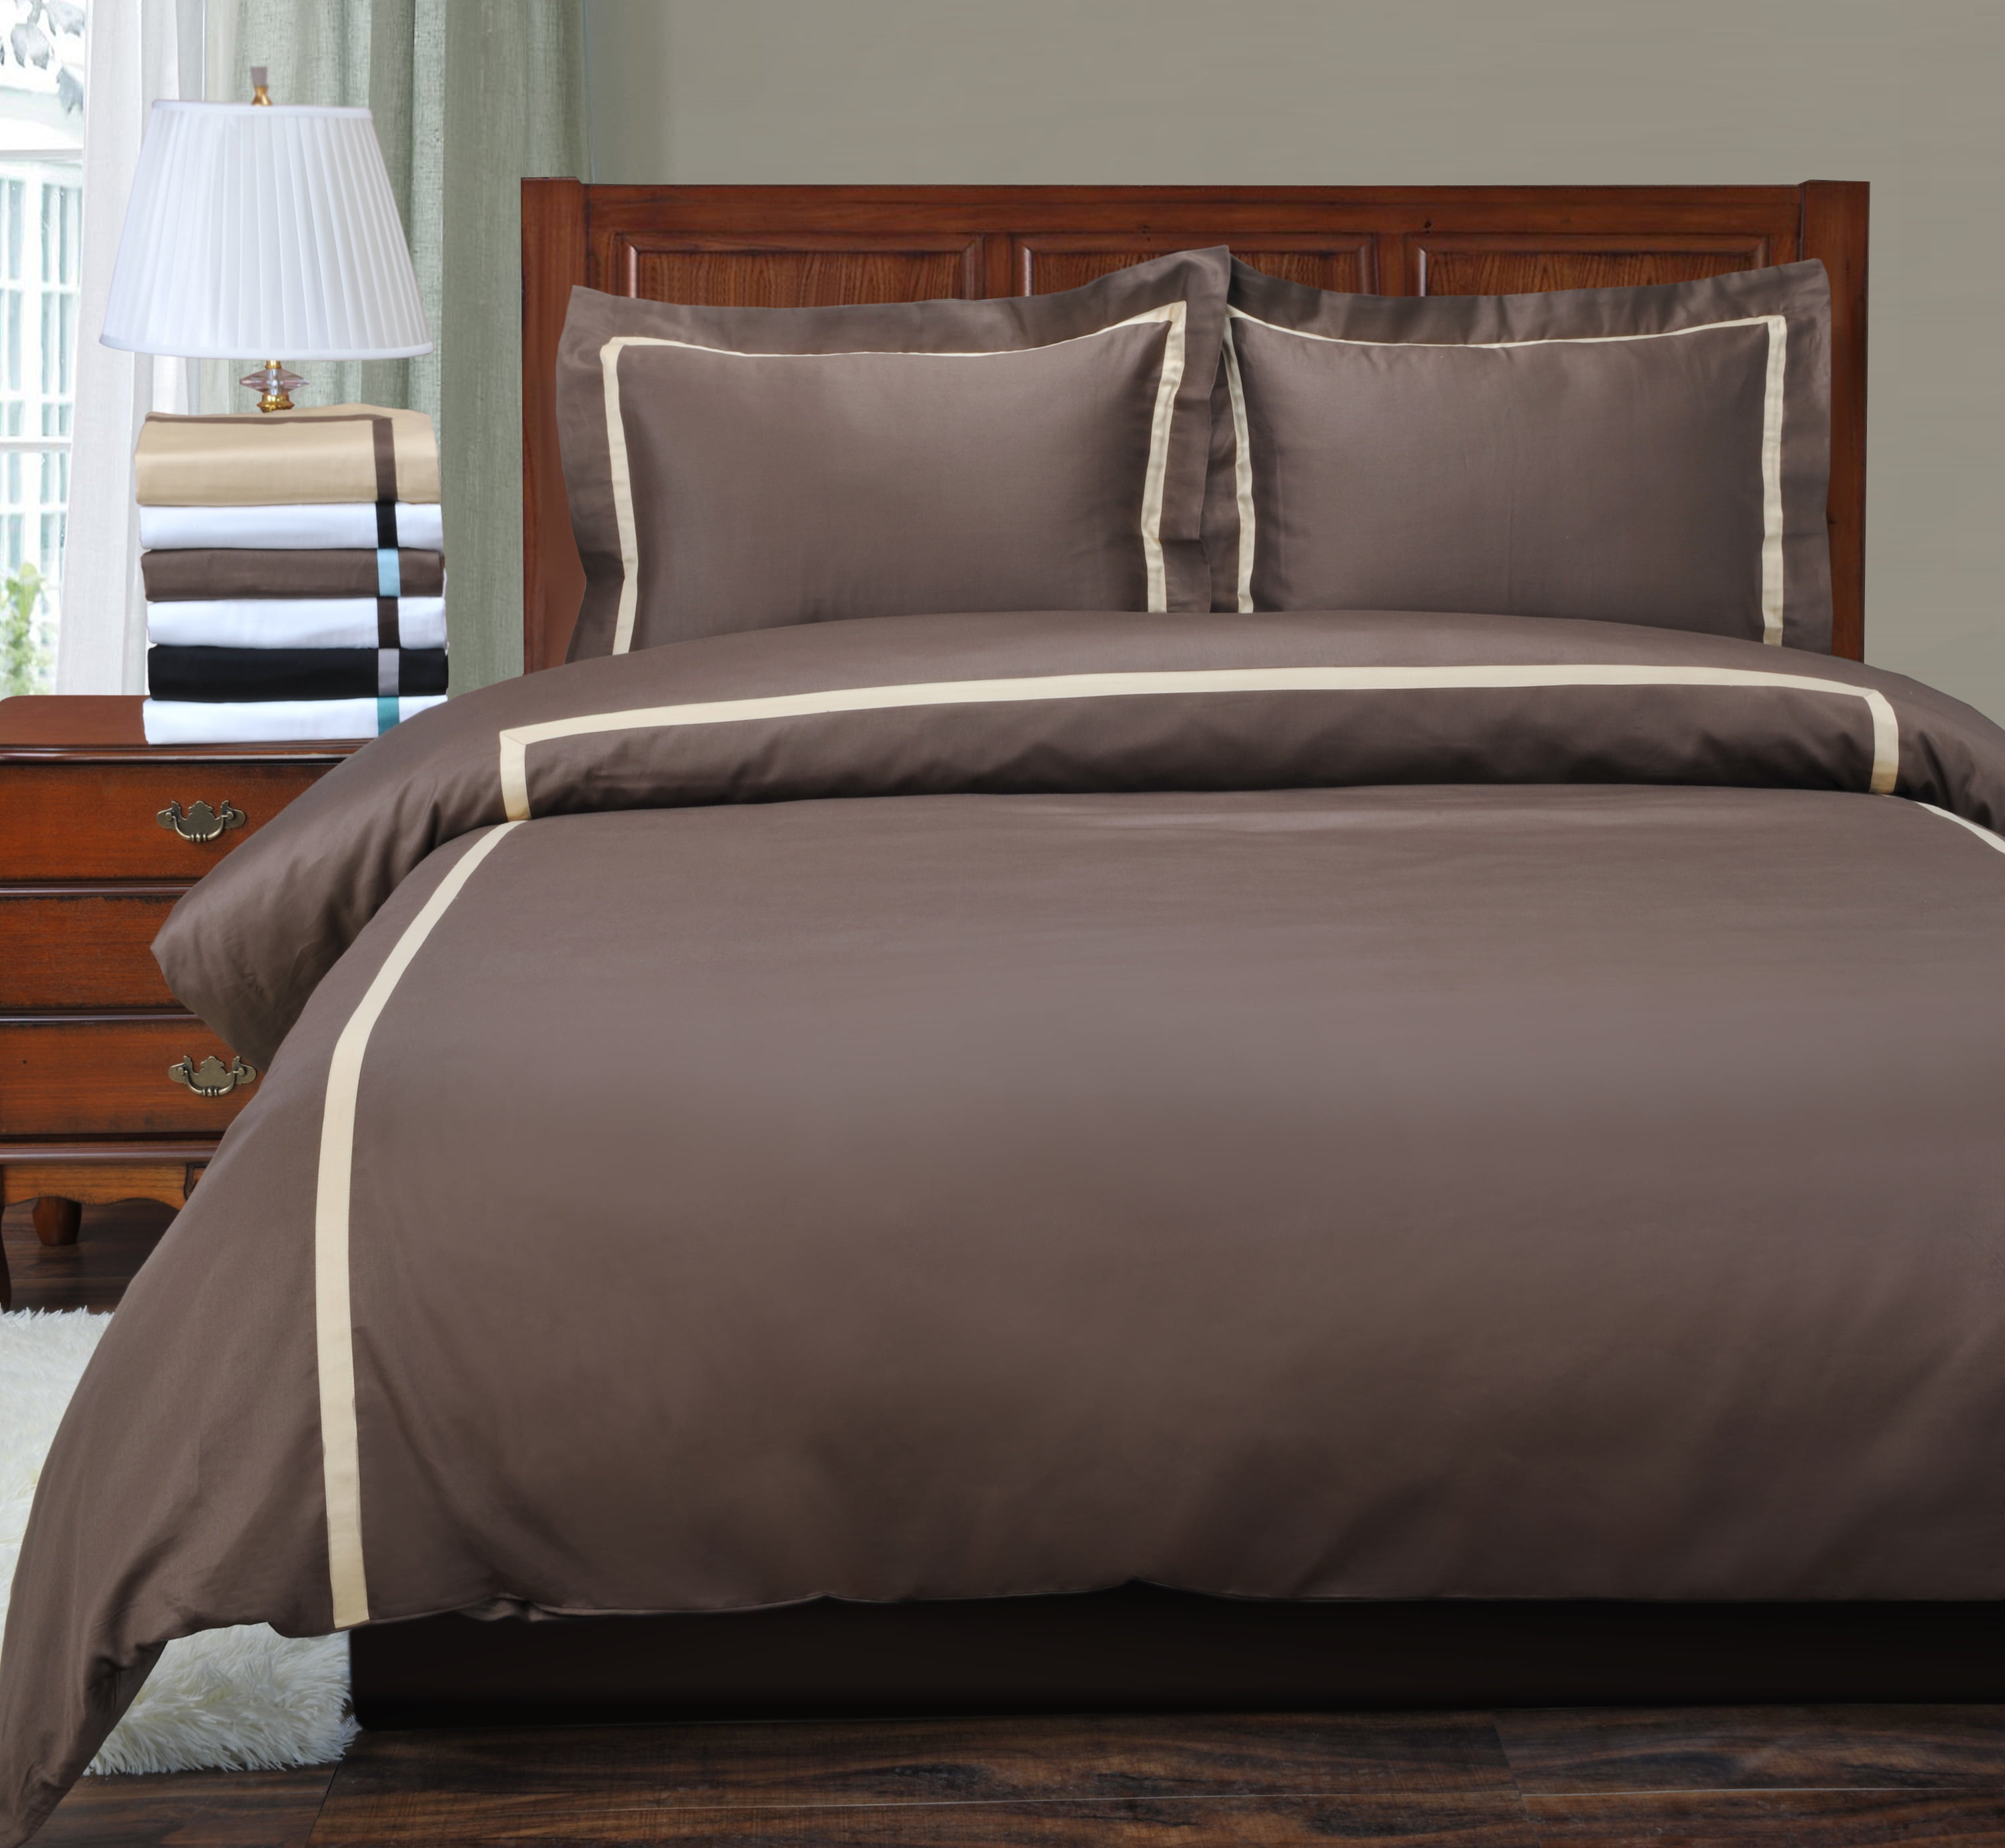 Superior 300 Thread Count Cotton Hotel, The Hotel Collection Duvet Covers